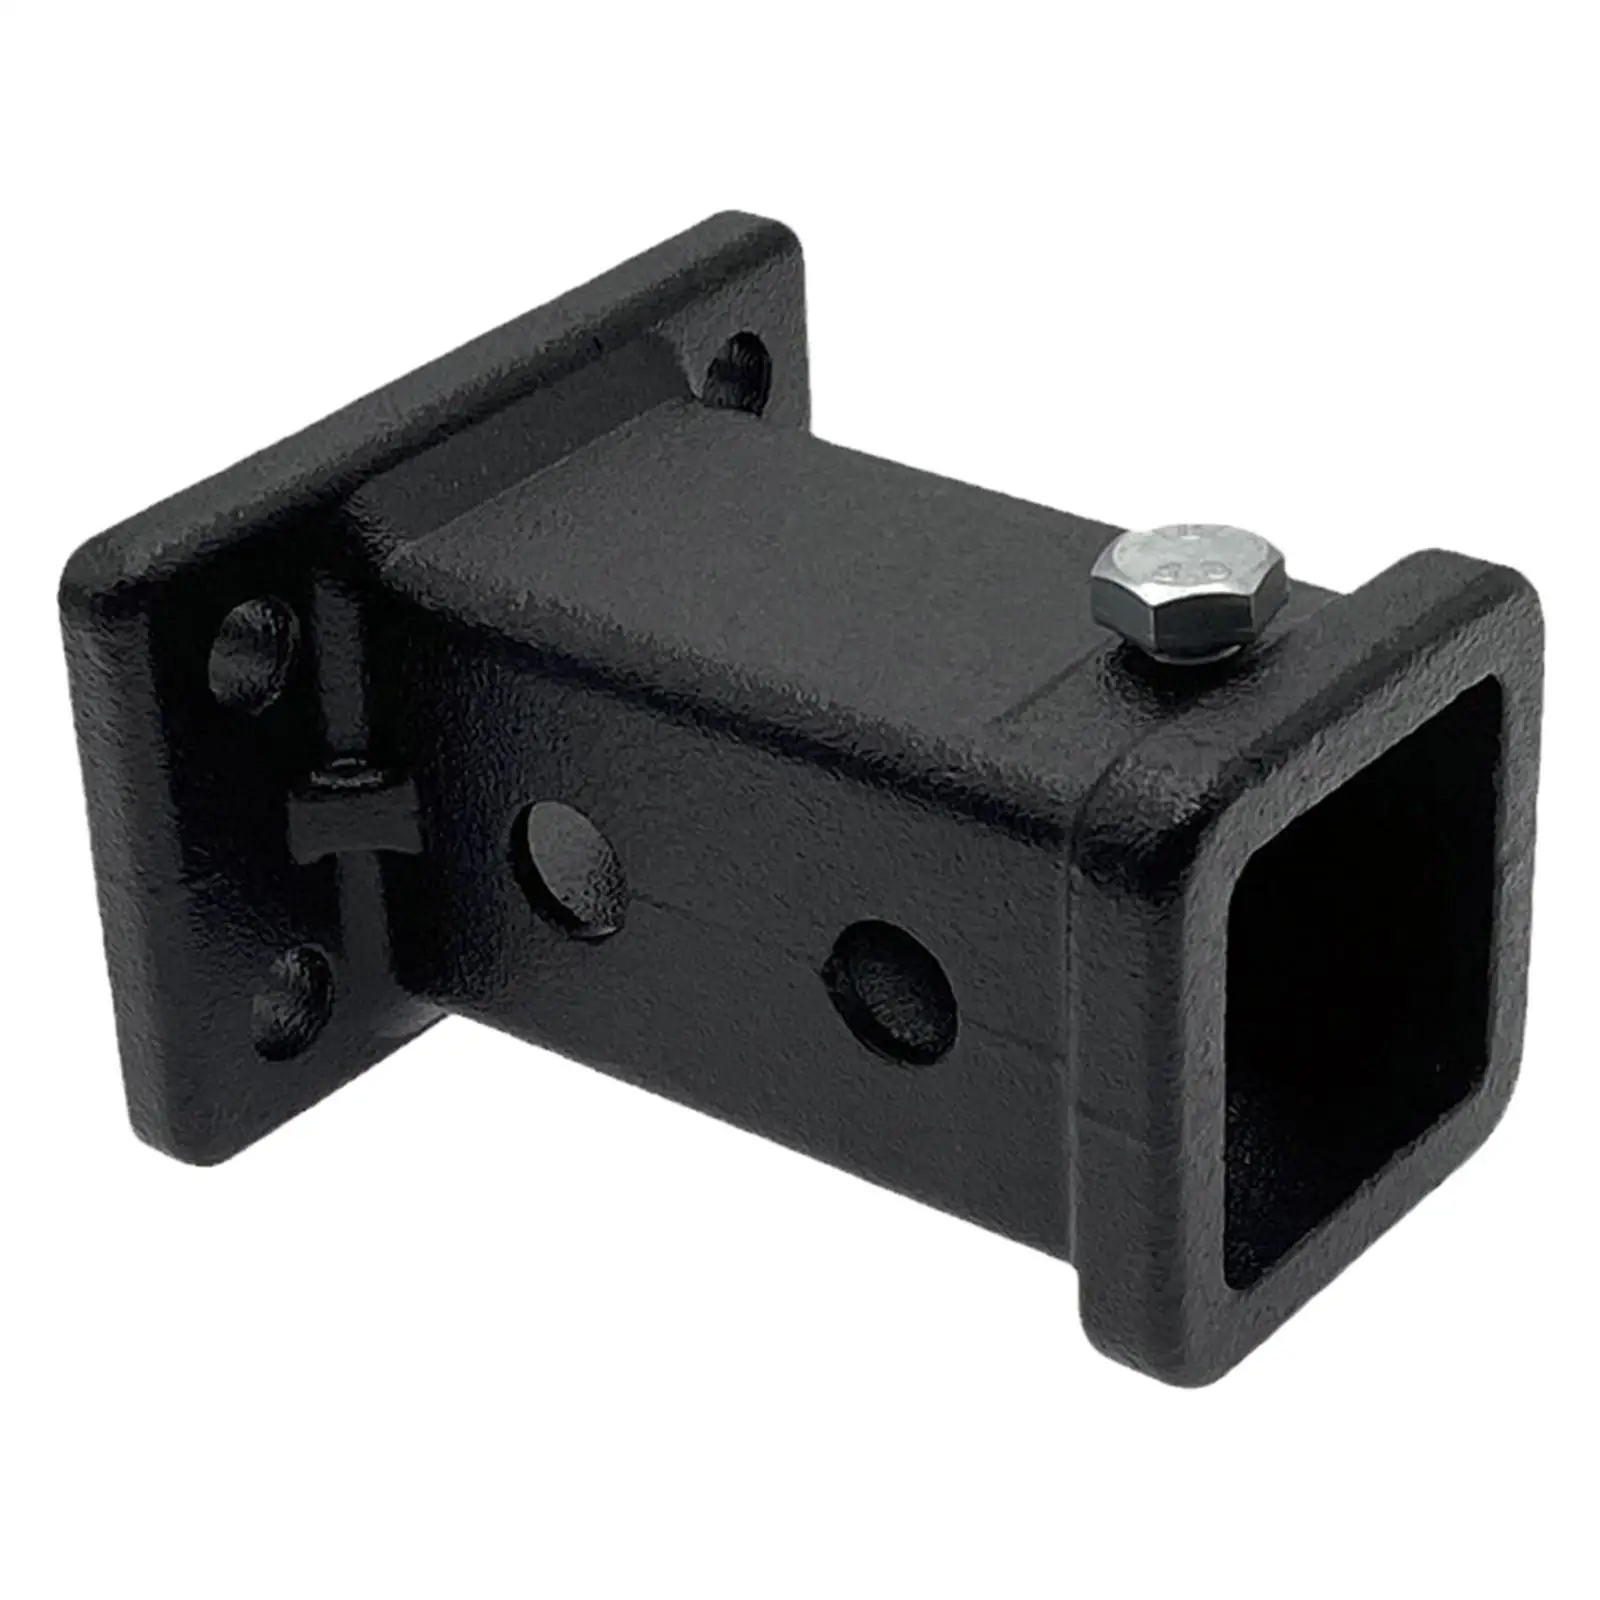 Trailer Hitch Adapter Hitch Reducer Sleeve Convertor for Accessories